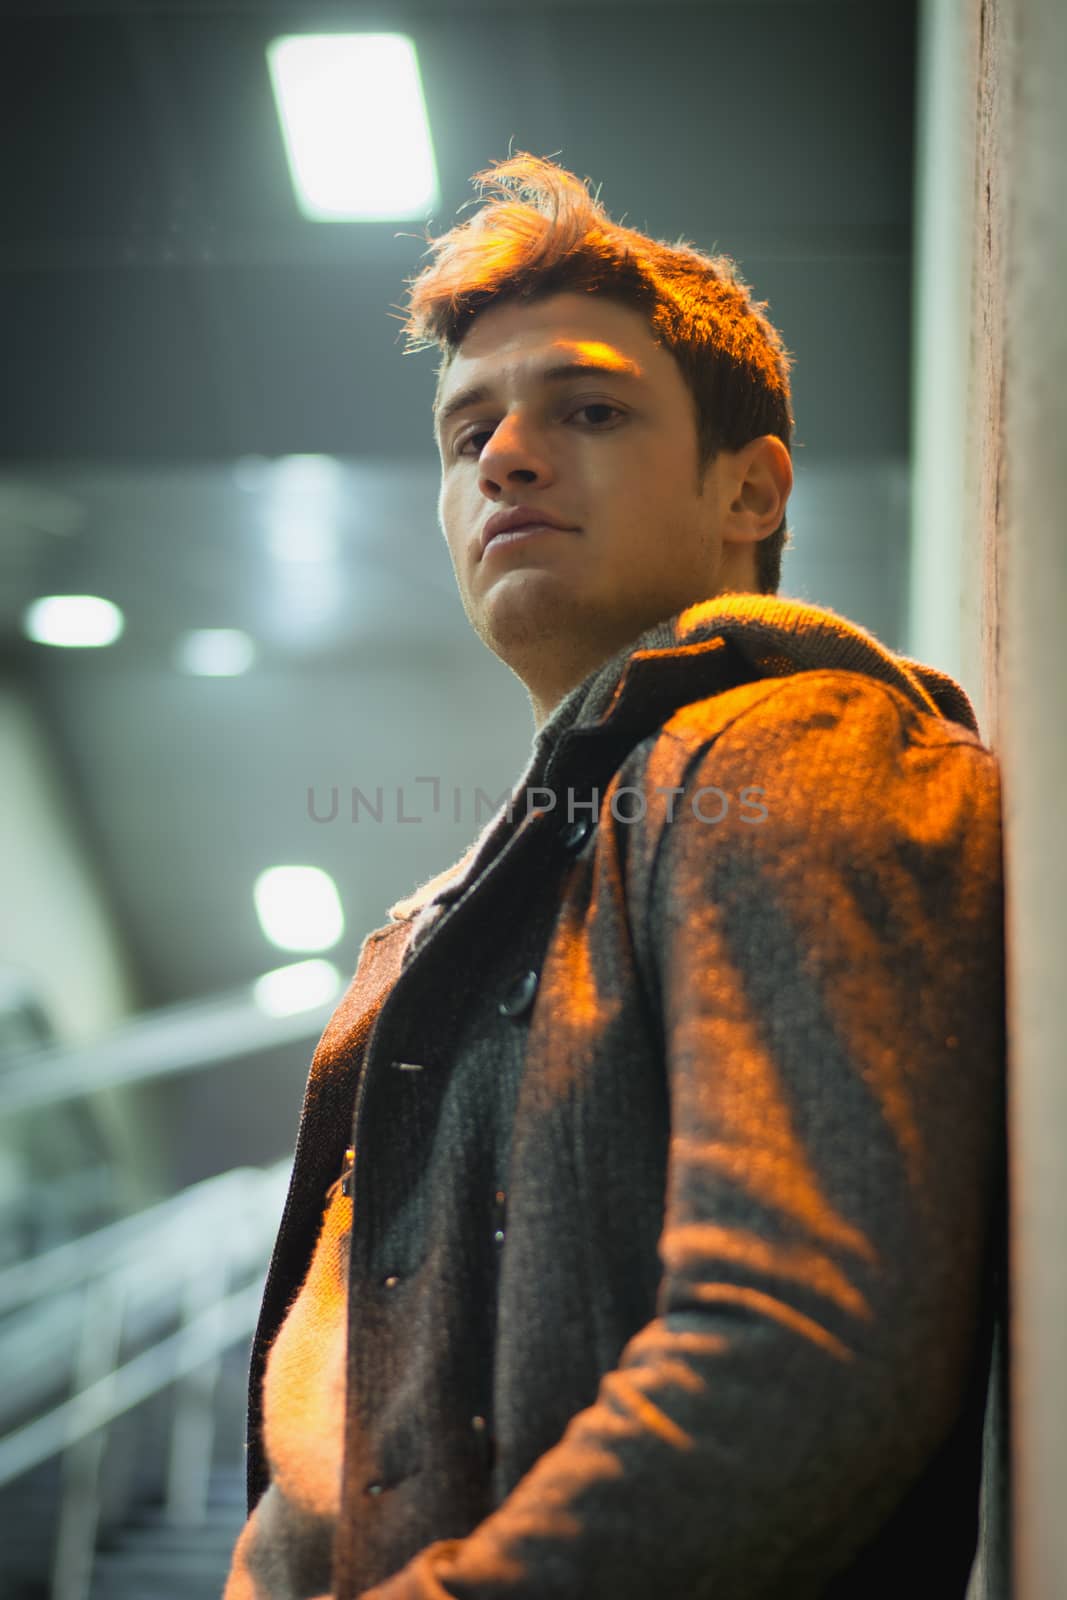 Profile shot of handsome young man inside train station by artofphoto